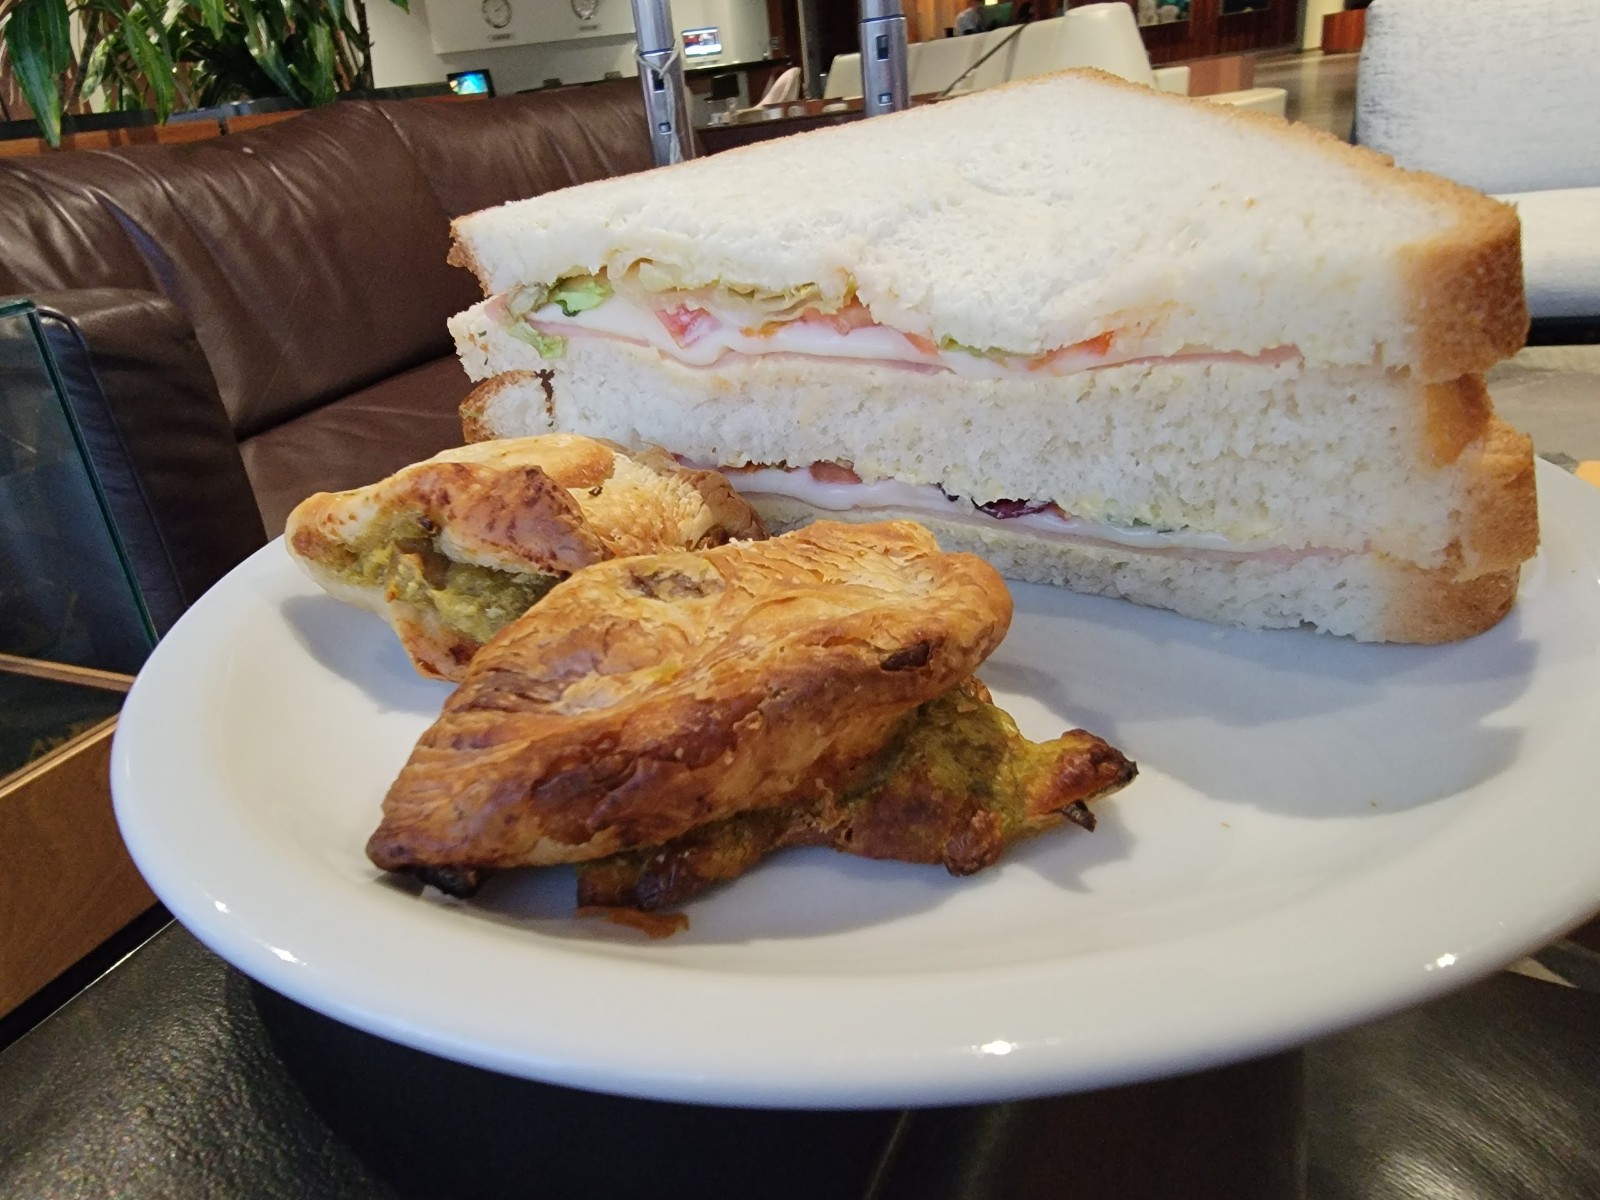 a sandwich and pastries on a plate